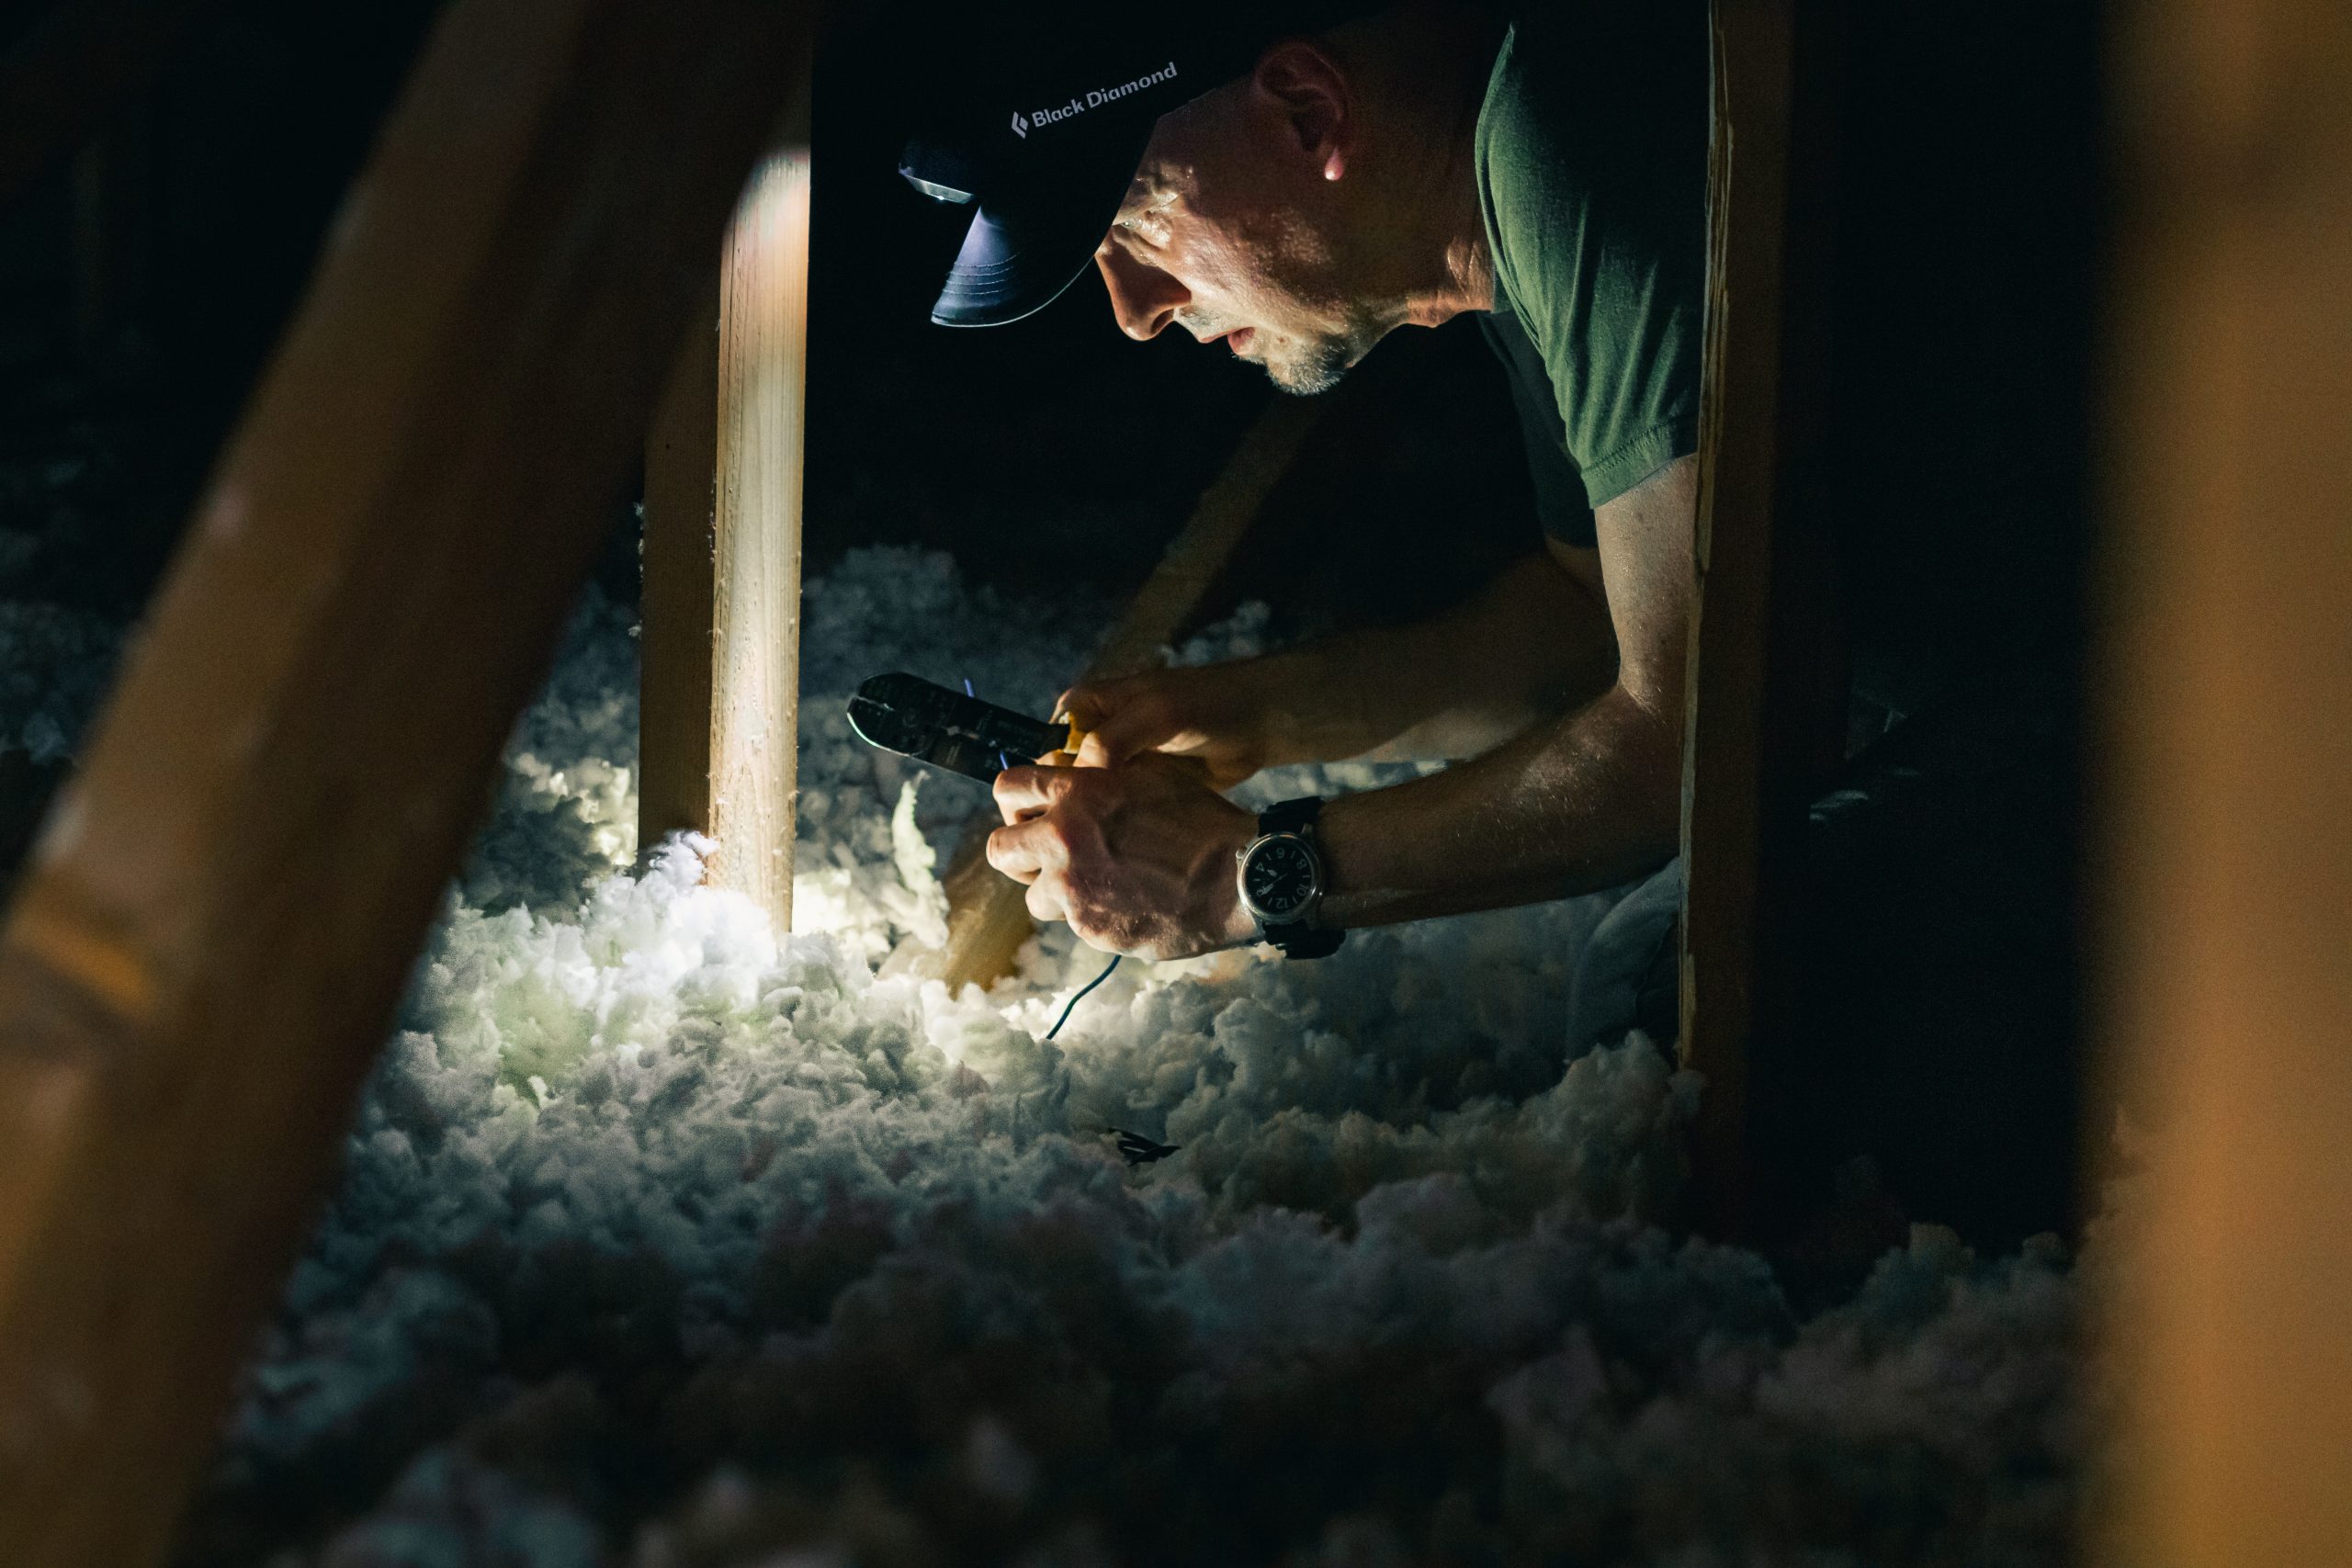 Man with headlamp fitting insulation